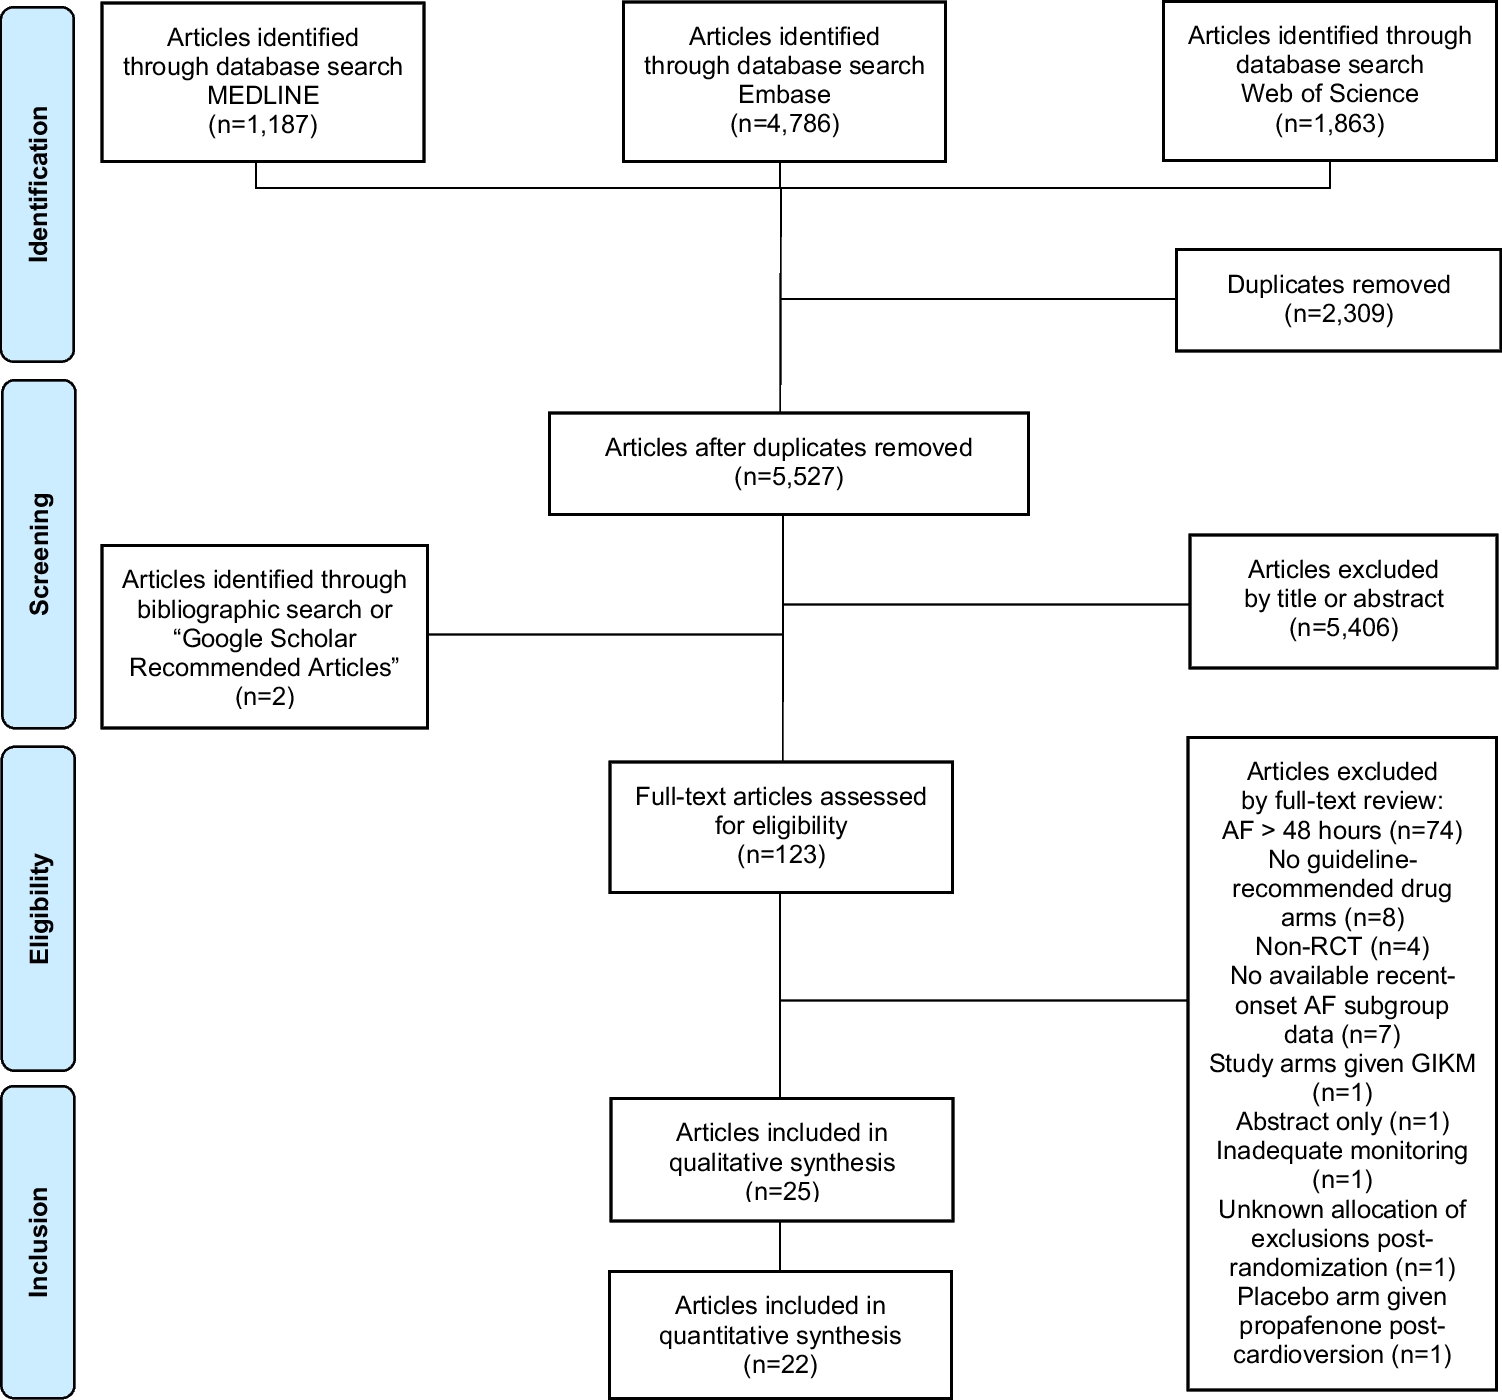 Safety and Effectiveness of Antidysrhythmic Drugs for Pharmacologic Cardioversion of Recent-Onset Atrial Fibrillation: a Systematic Review and Bayesian Network Meta-analysis